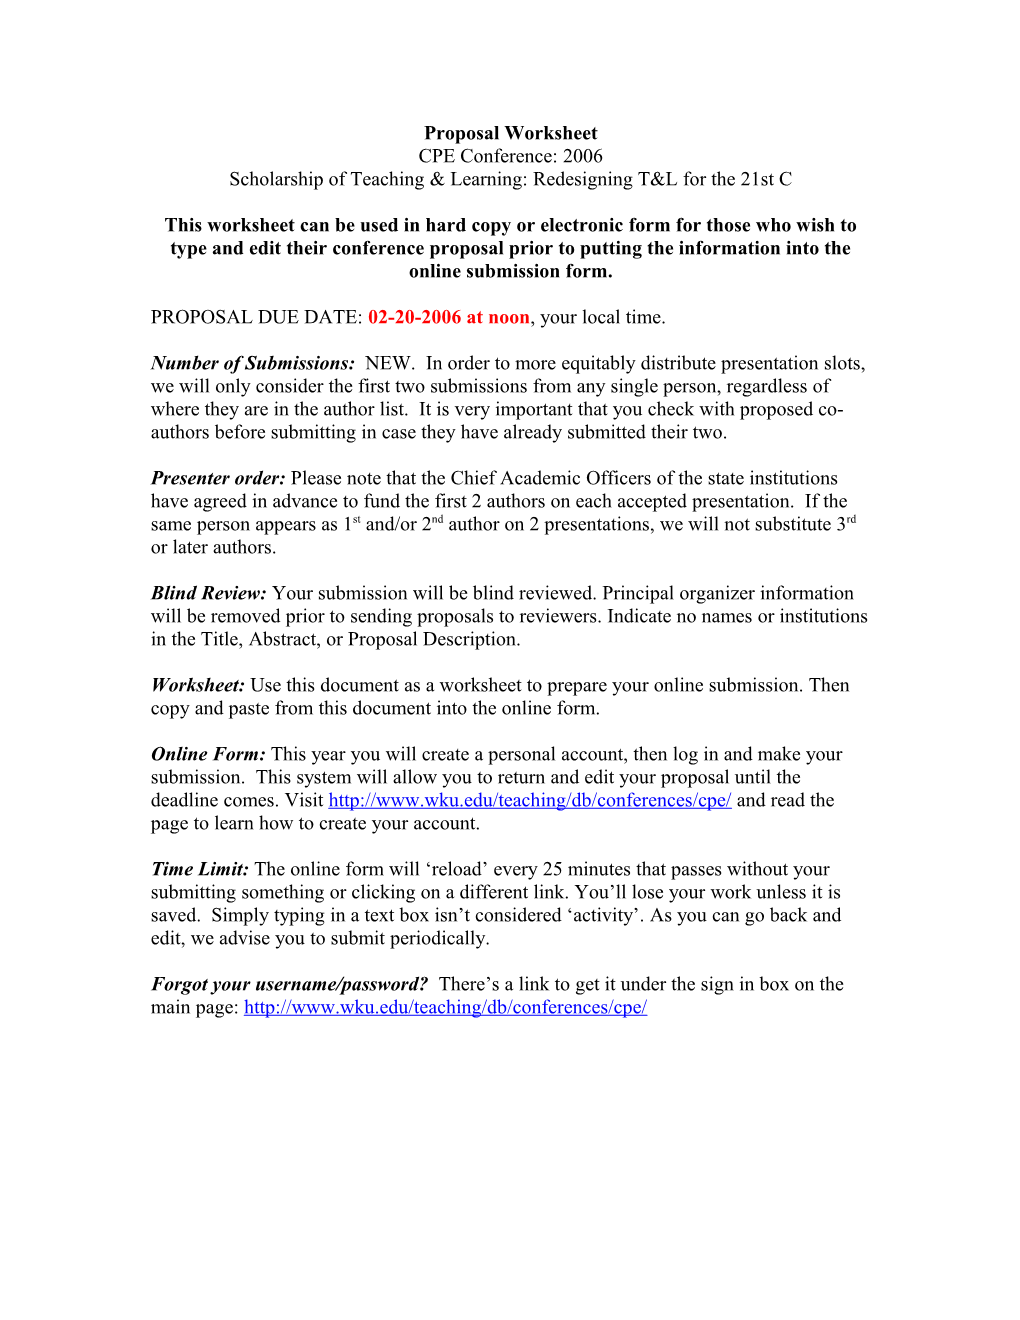 Proposal Worksheet CPE Conference: 2006 Scholarship of Teaching & Learning: Redesigning